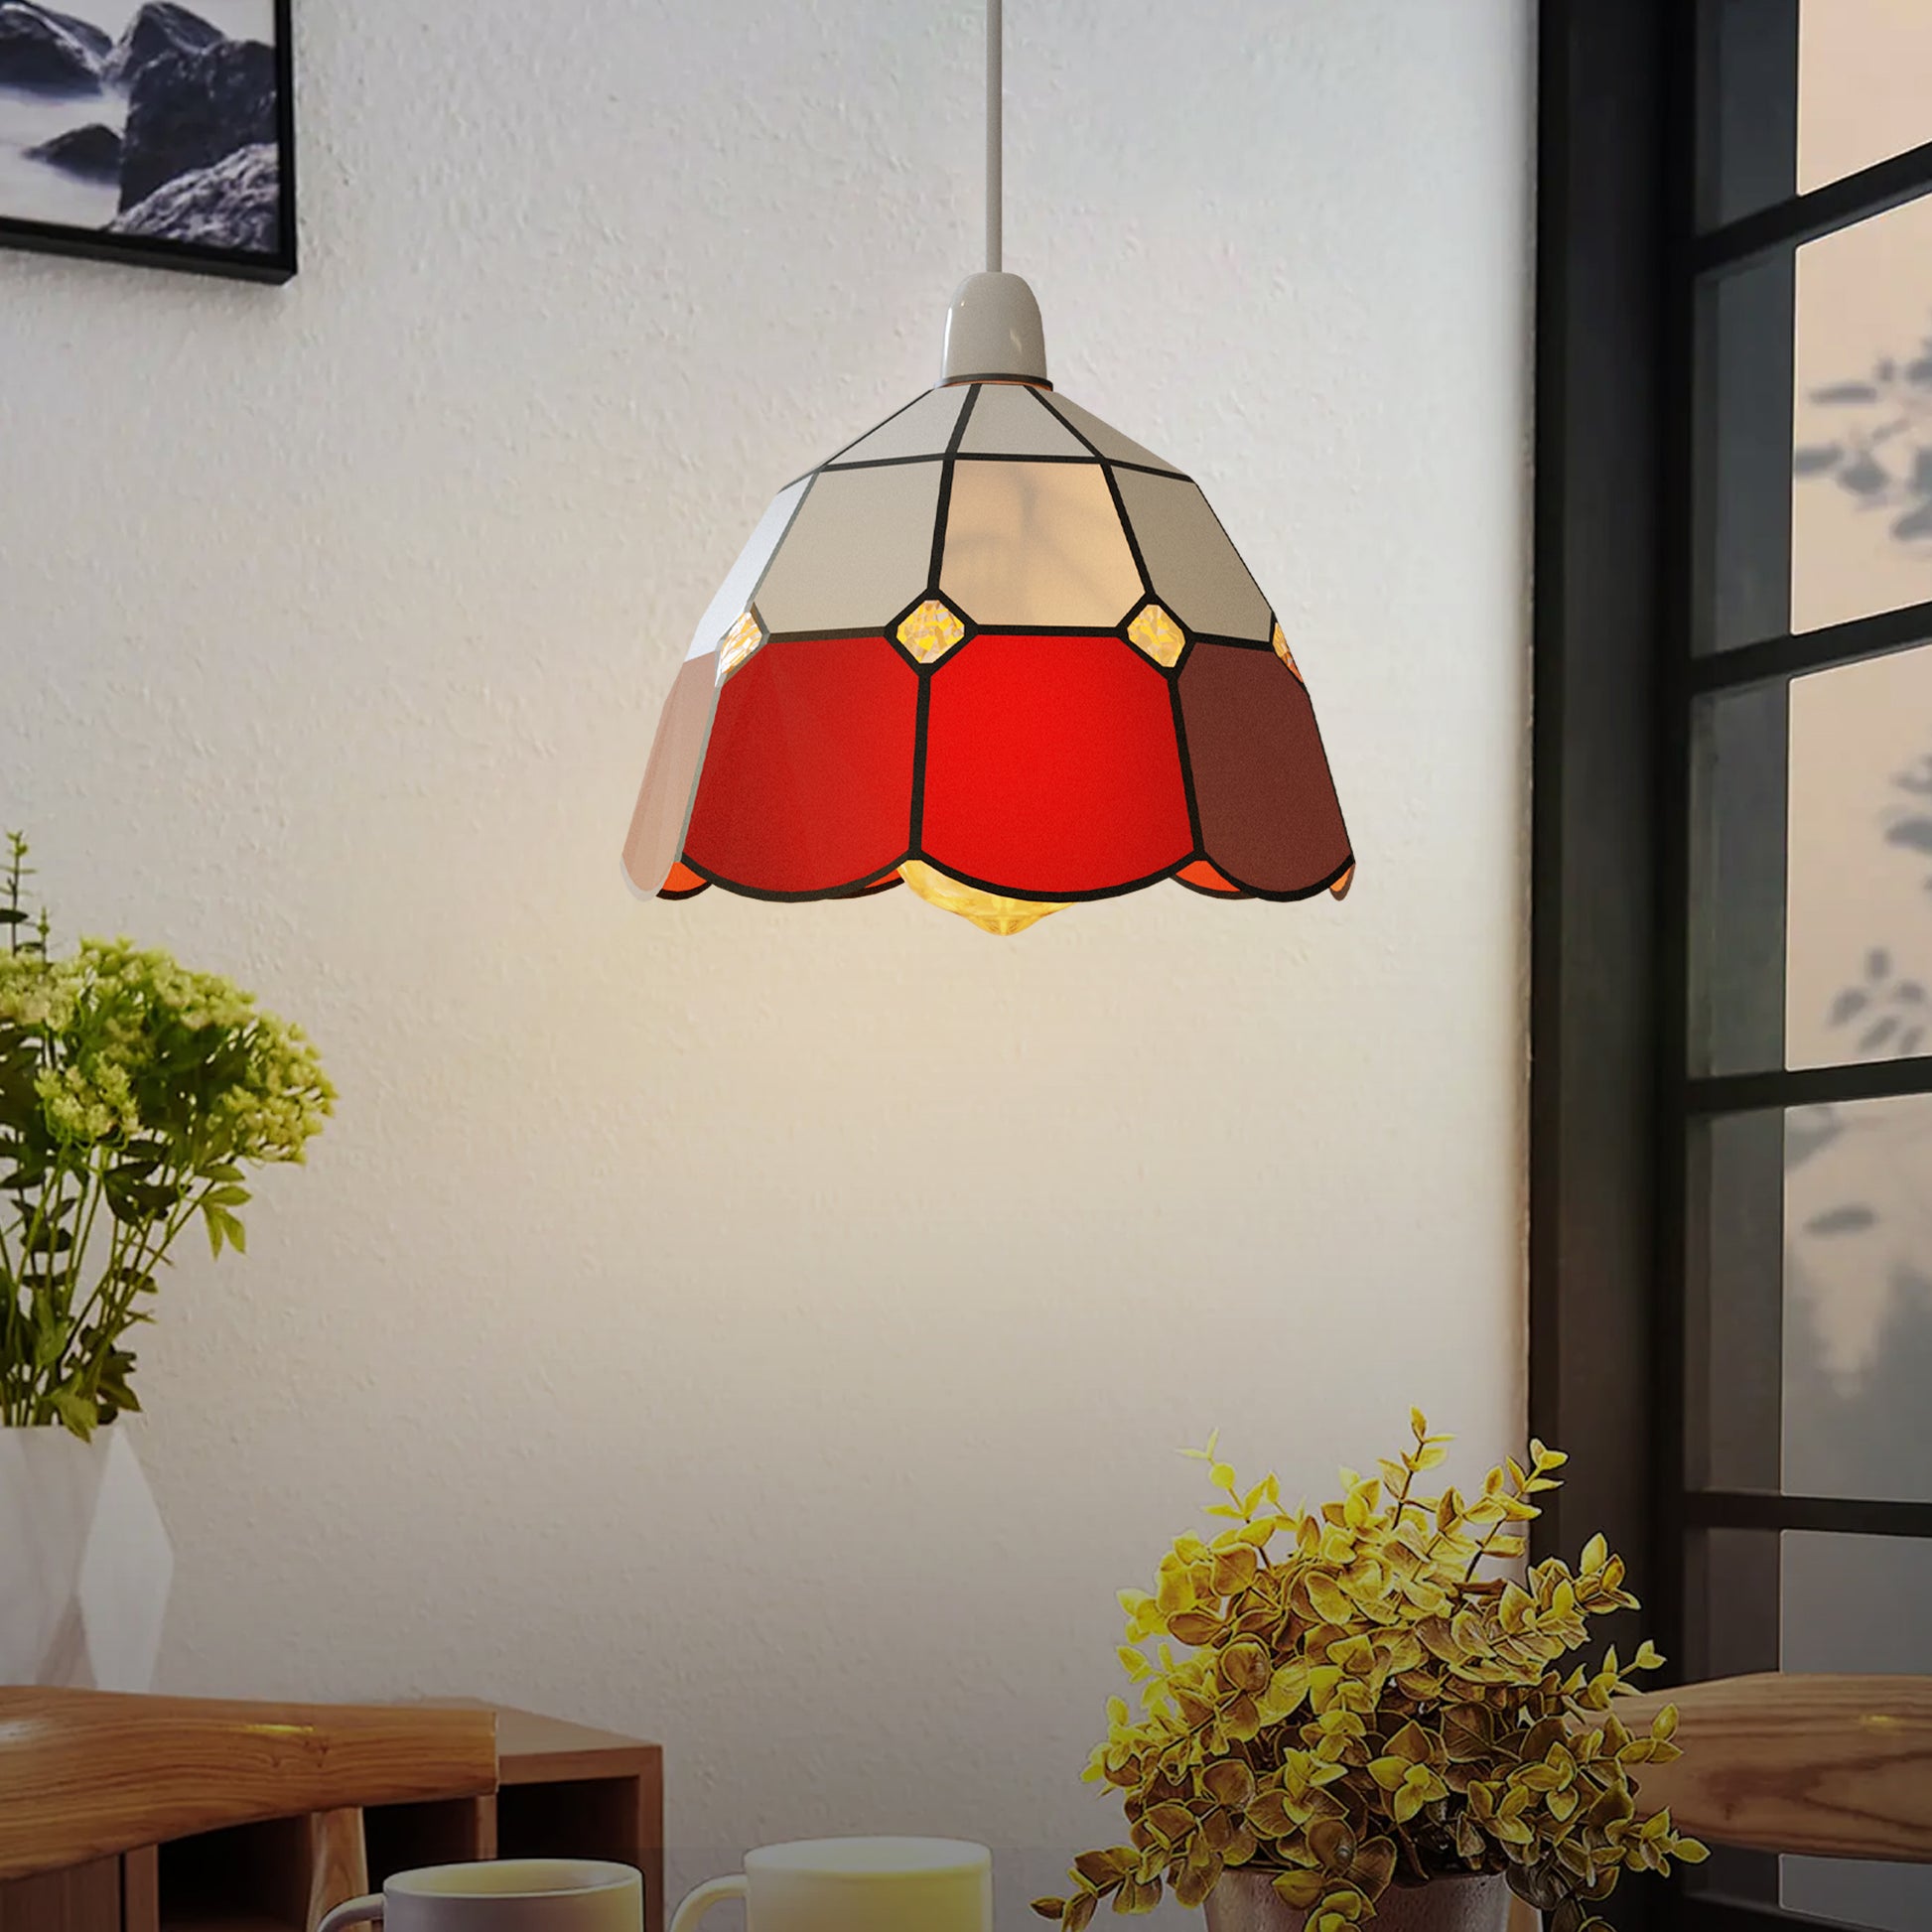 Vintage Tiffany Style Stained Glass Lamp Shade Fixtures - Application 7